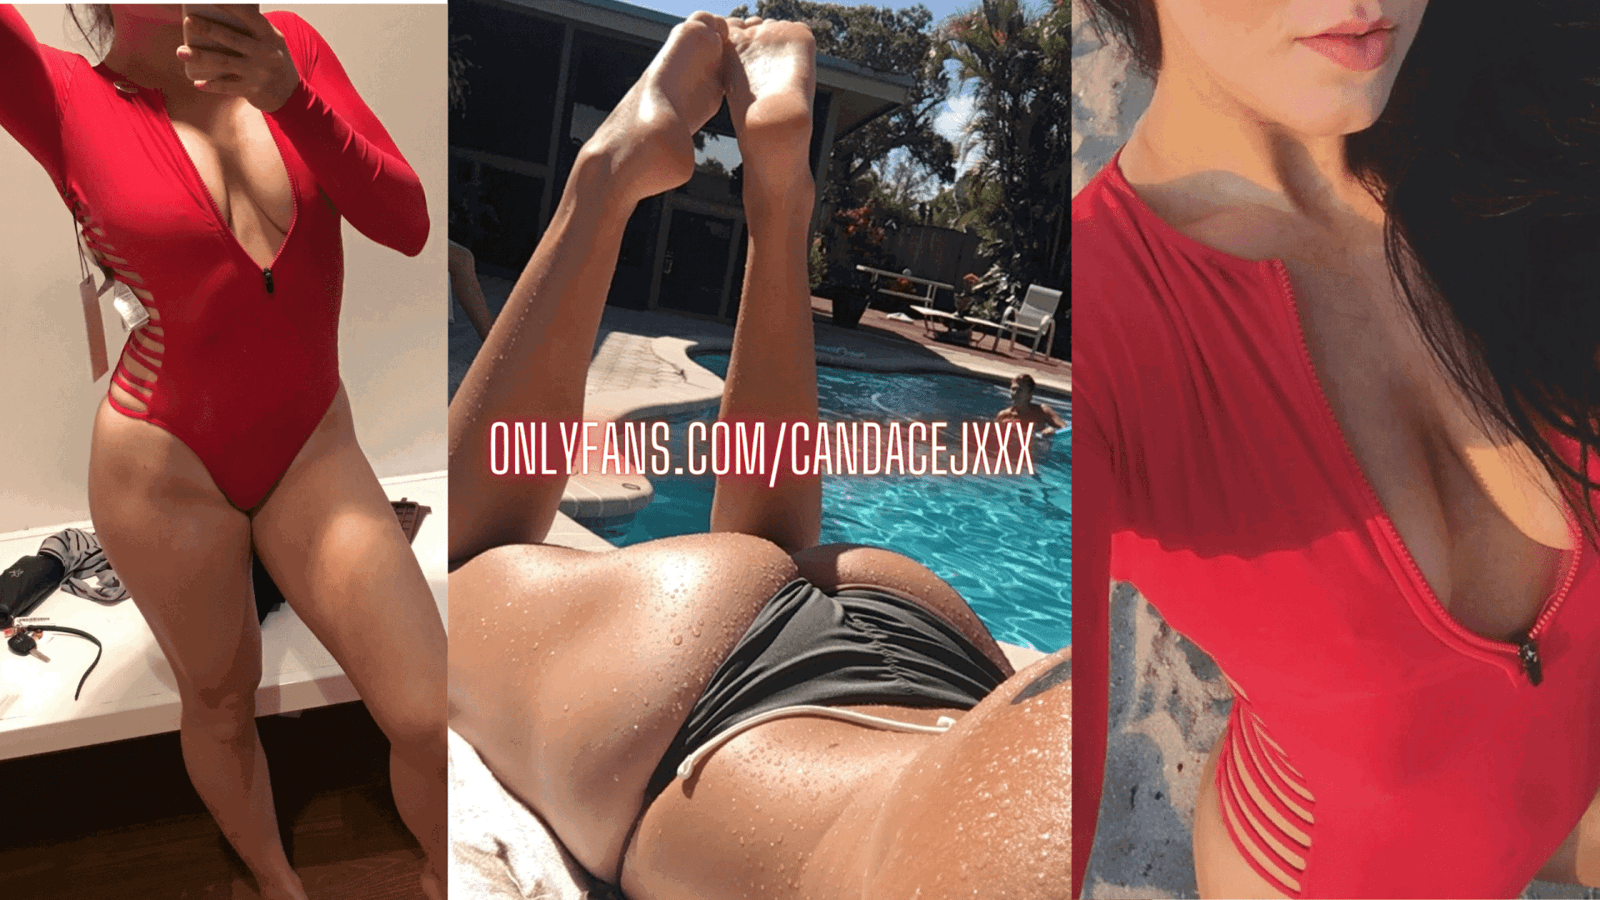 Cover photo of Candacejxxx